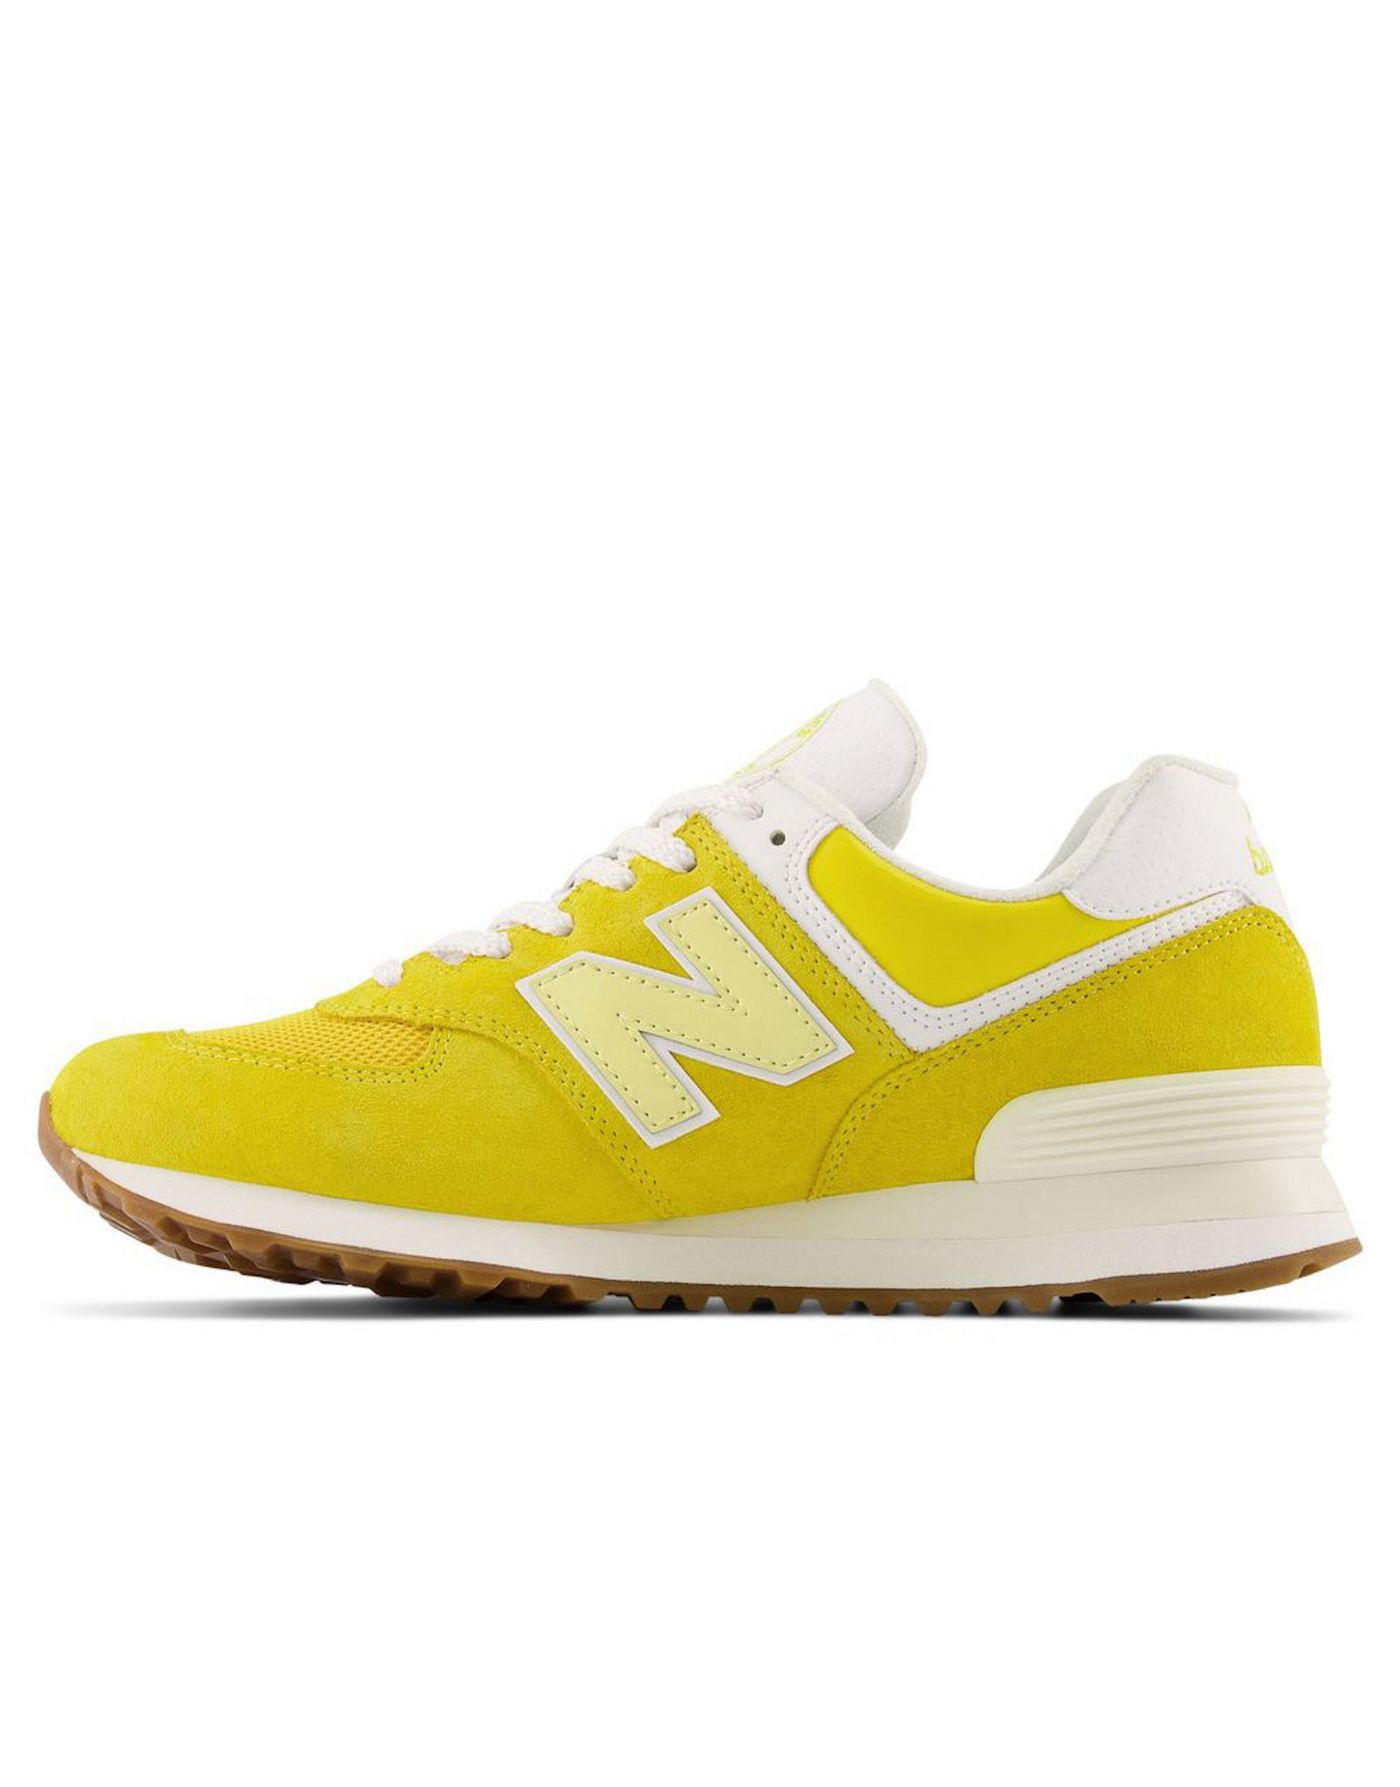 New Balance 574 trainers in yellow